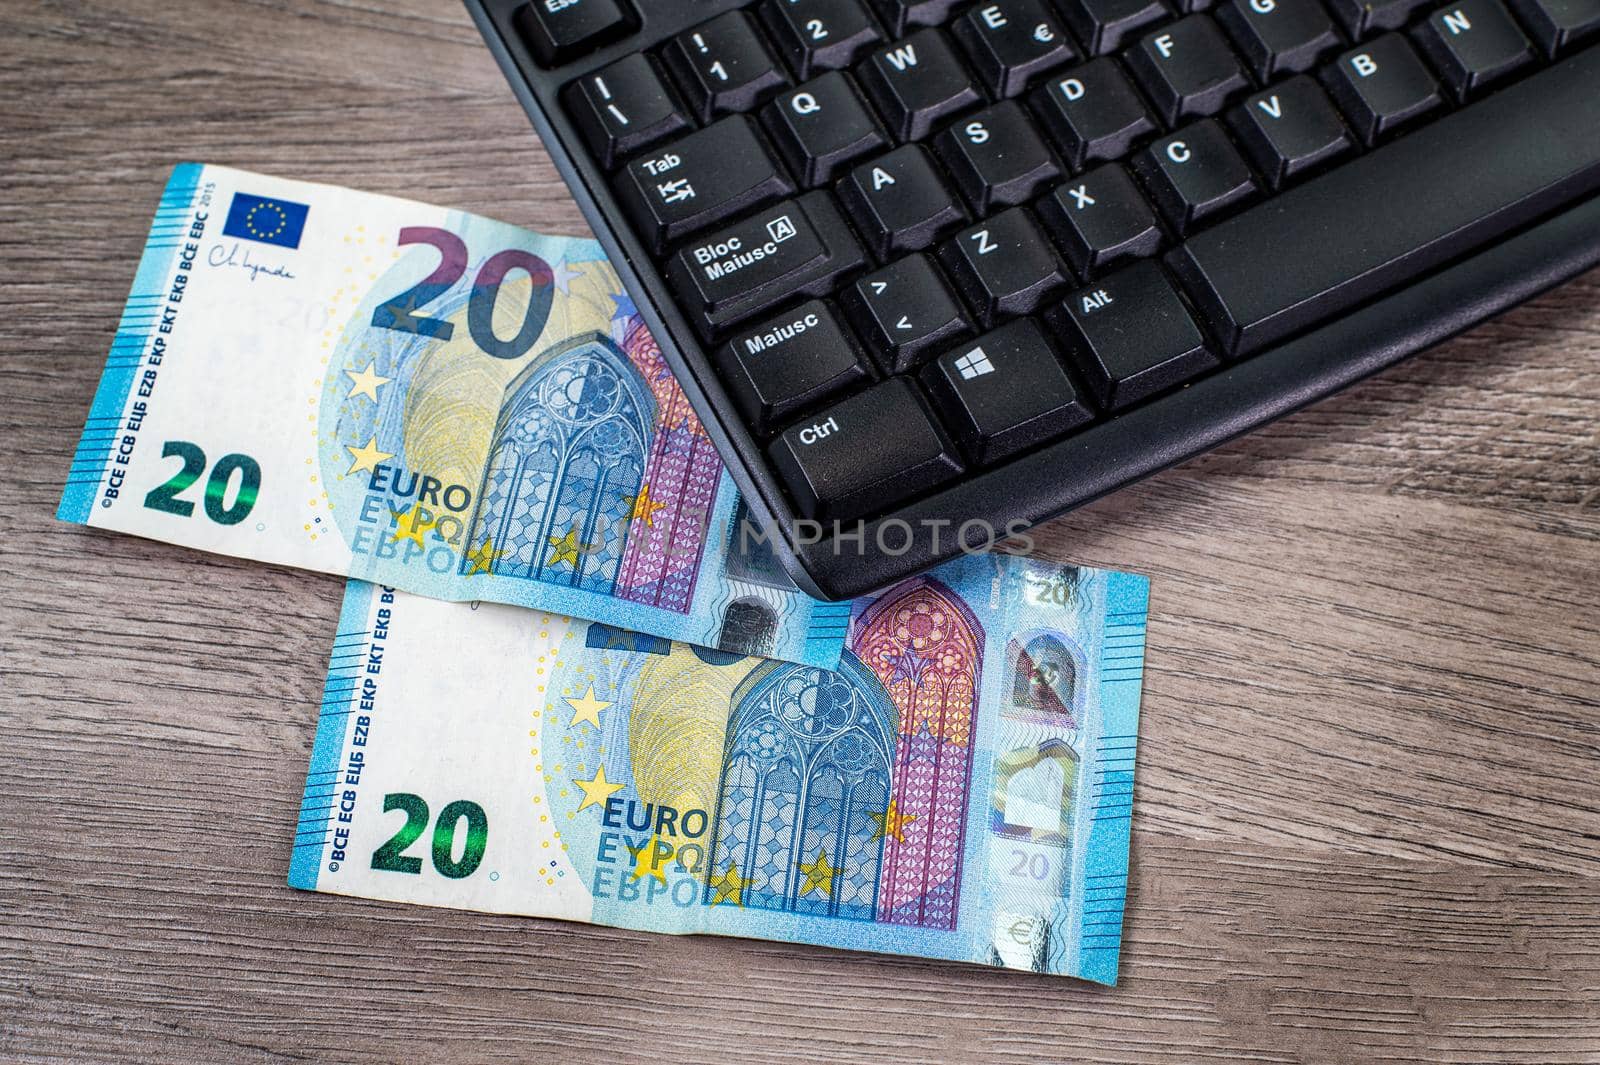 20 euro bills and computer keyboard on wooden background